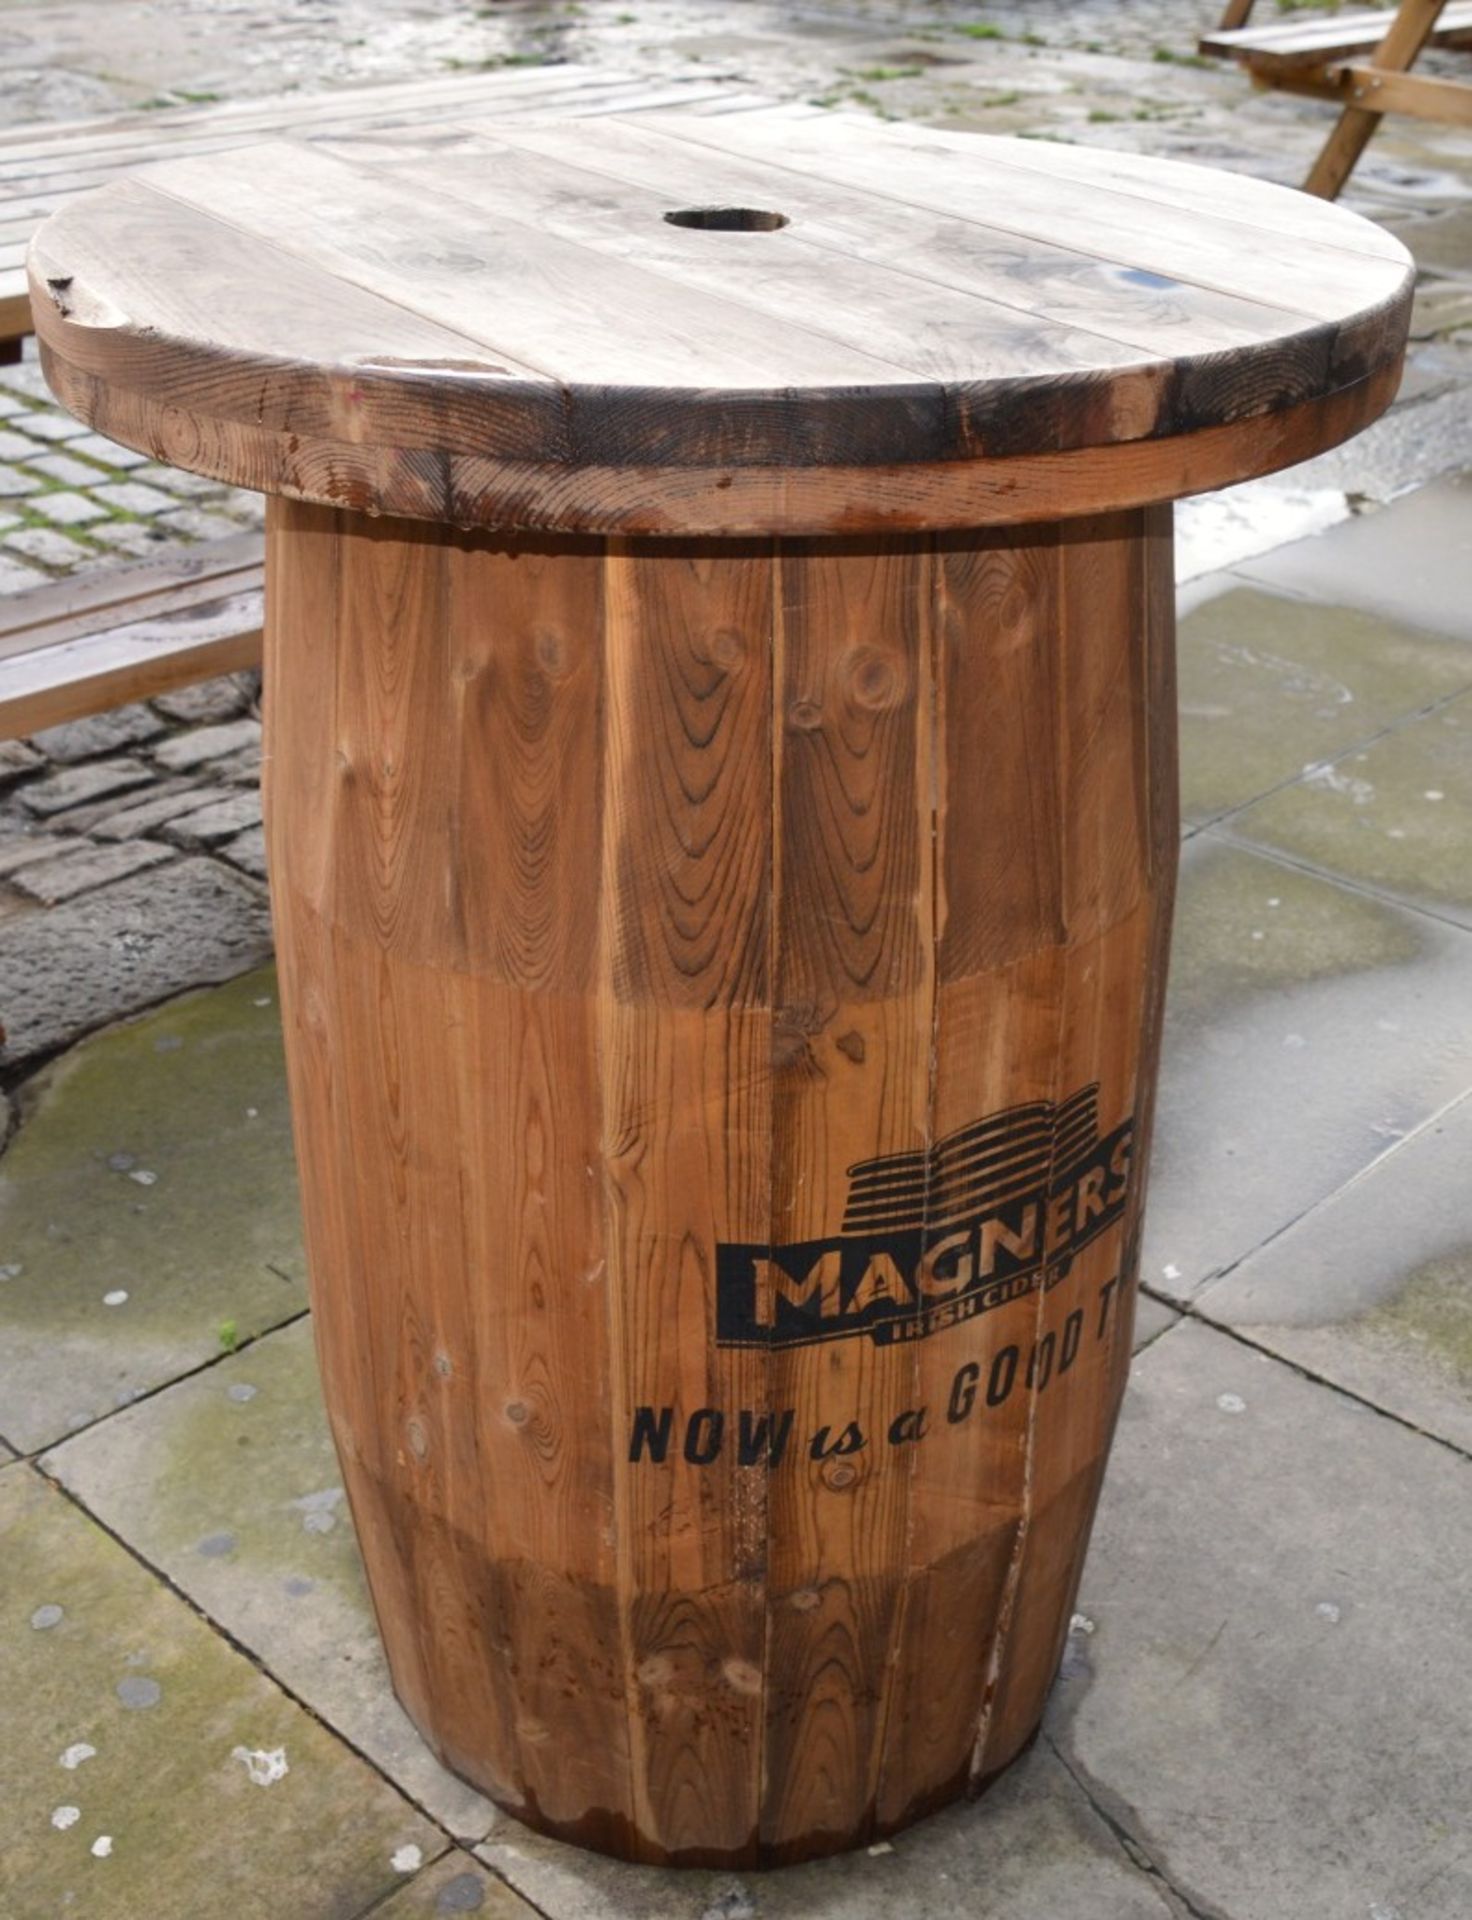 1 x Poser Pub Barrel Table - With Magners Logo - Designed For 4 People to Sit or Stand Around - - Image 4 of 4